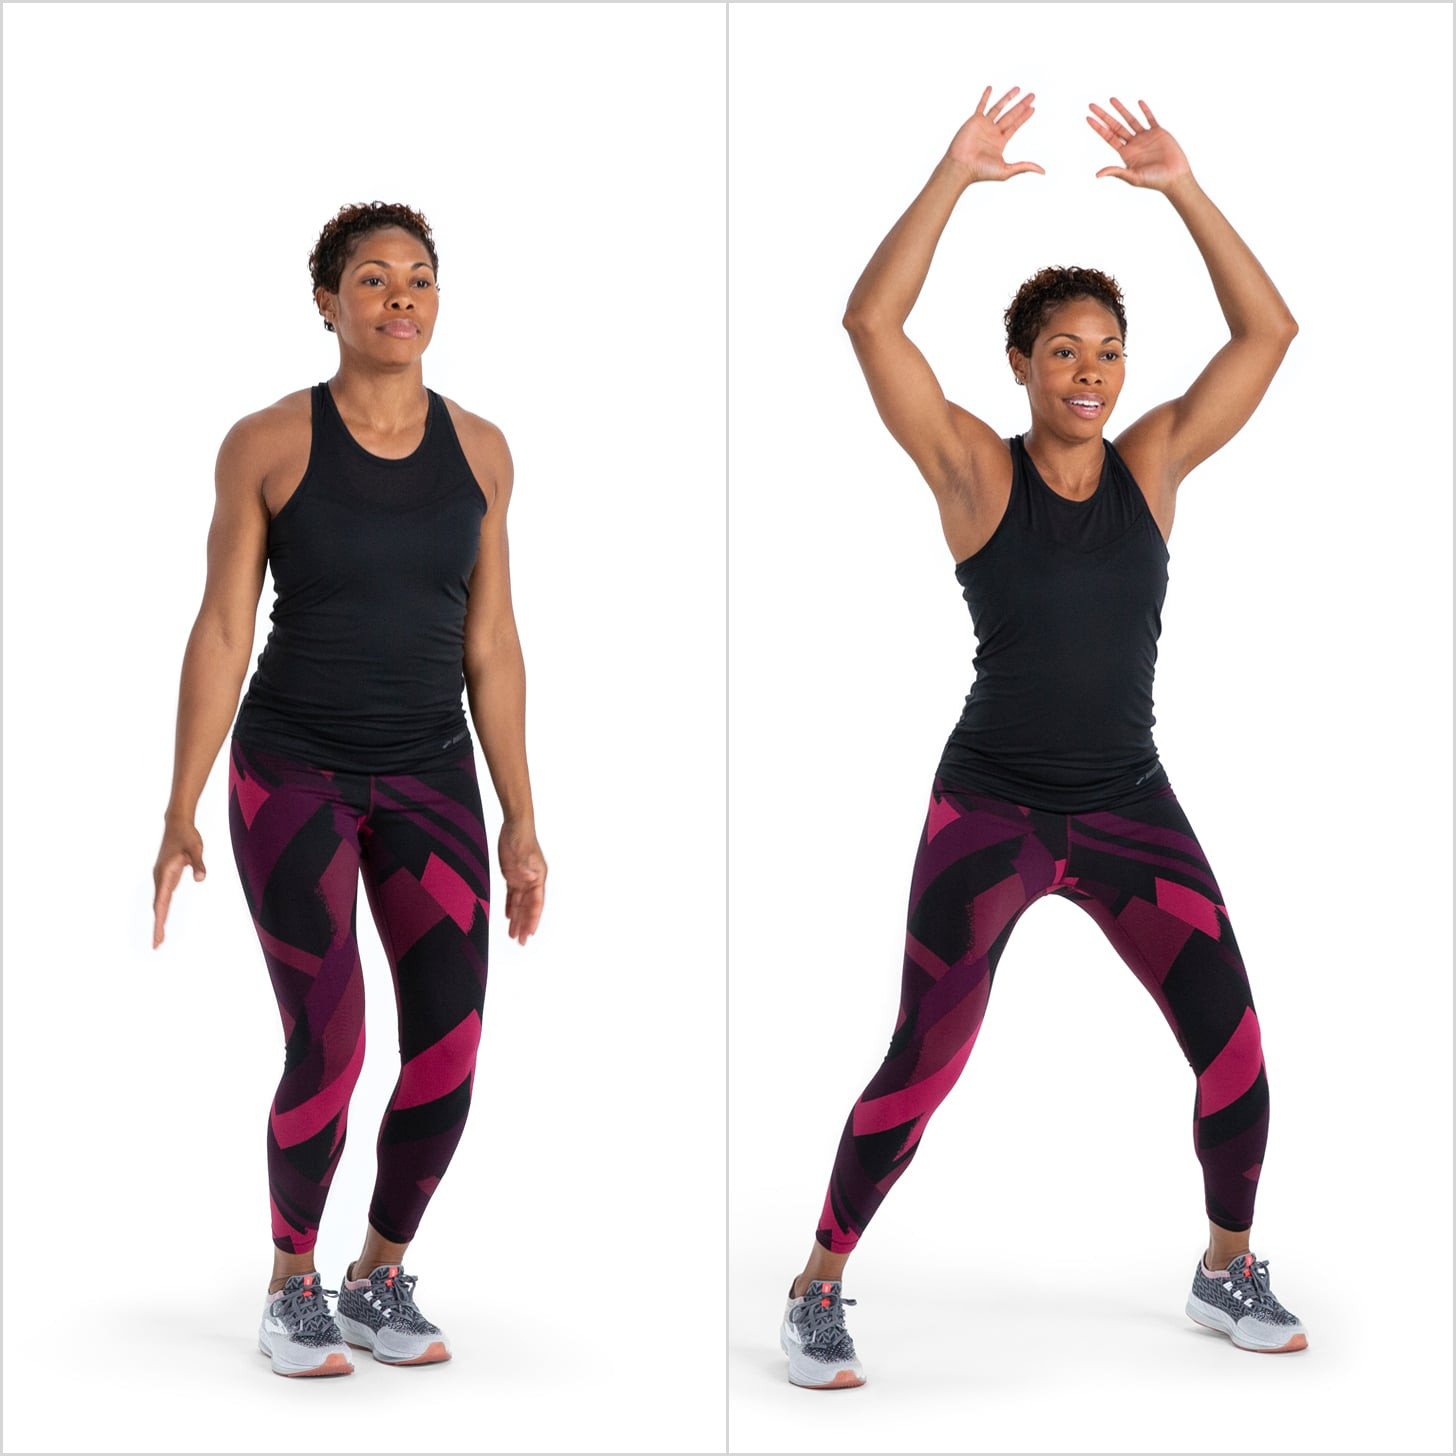 Warmup Exercise 3: Jumping Jack | Build Muscle and Boost Your Heart Rate  With This 45-Minute Dumbbell HIIT Workout | POPSUGAR Fitness UK Photo 3